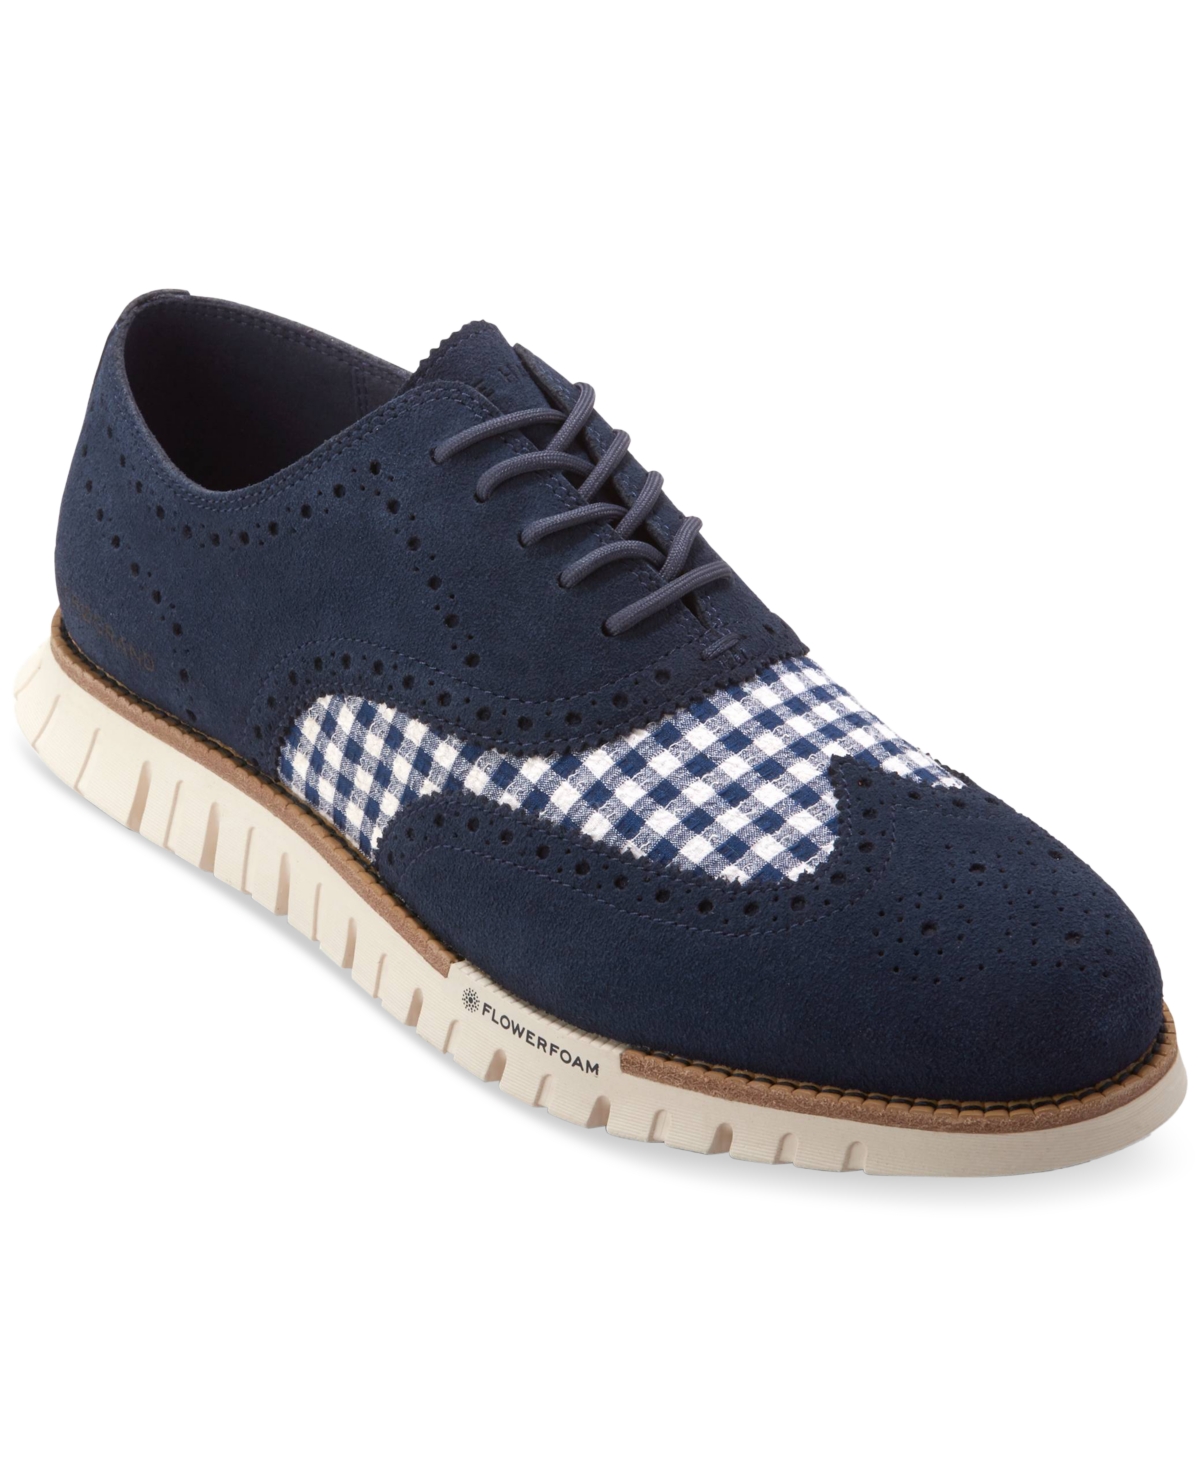 Cole Haan Men's Zerøgrand Remastered Lace-up Wingtip Oxford Dress Shoes In Navy Blazer Blue Gingham-ivory